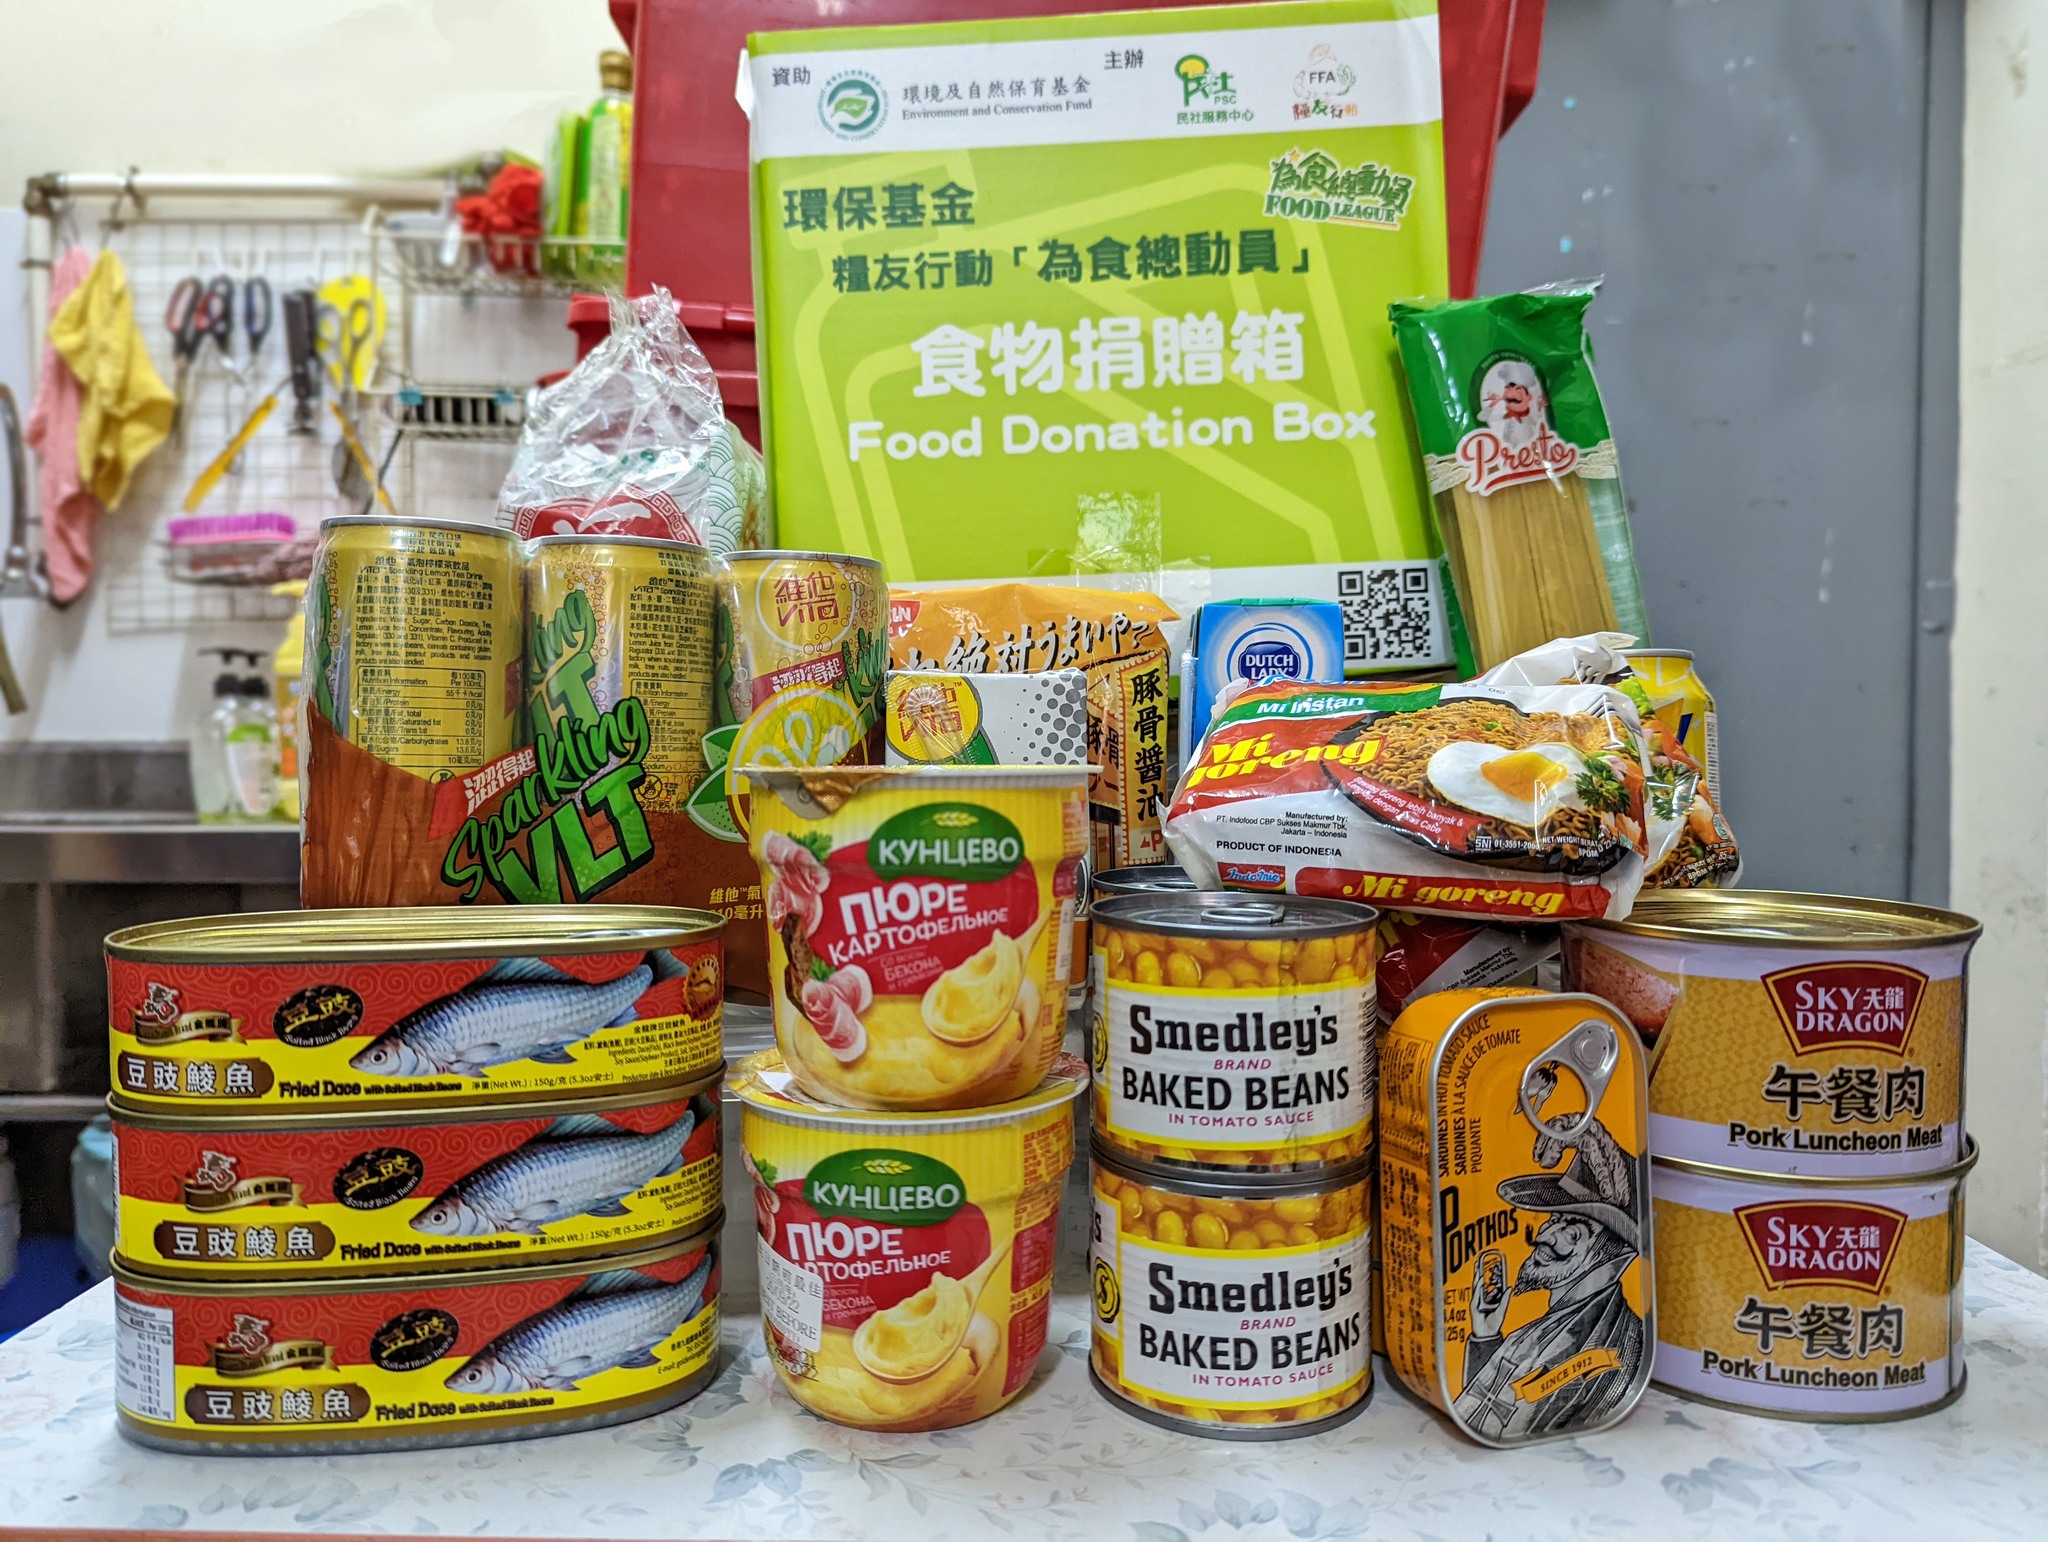 Different types of foods donated by the public